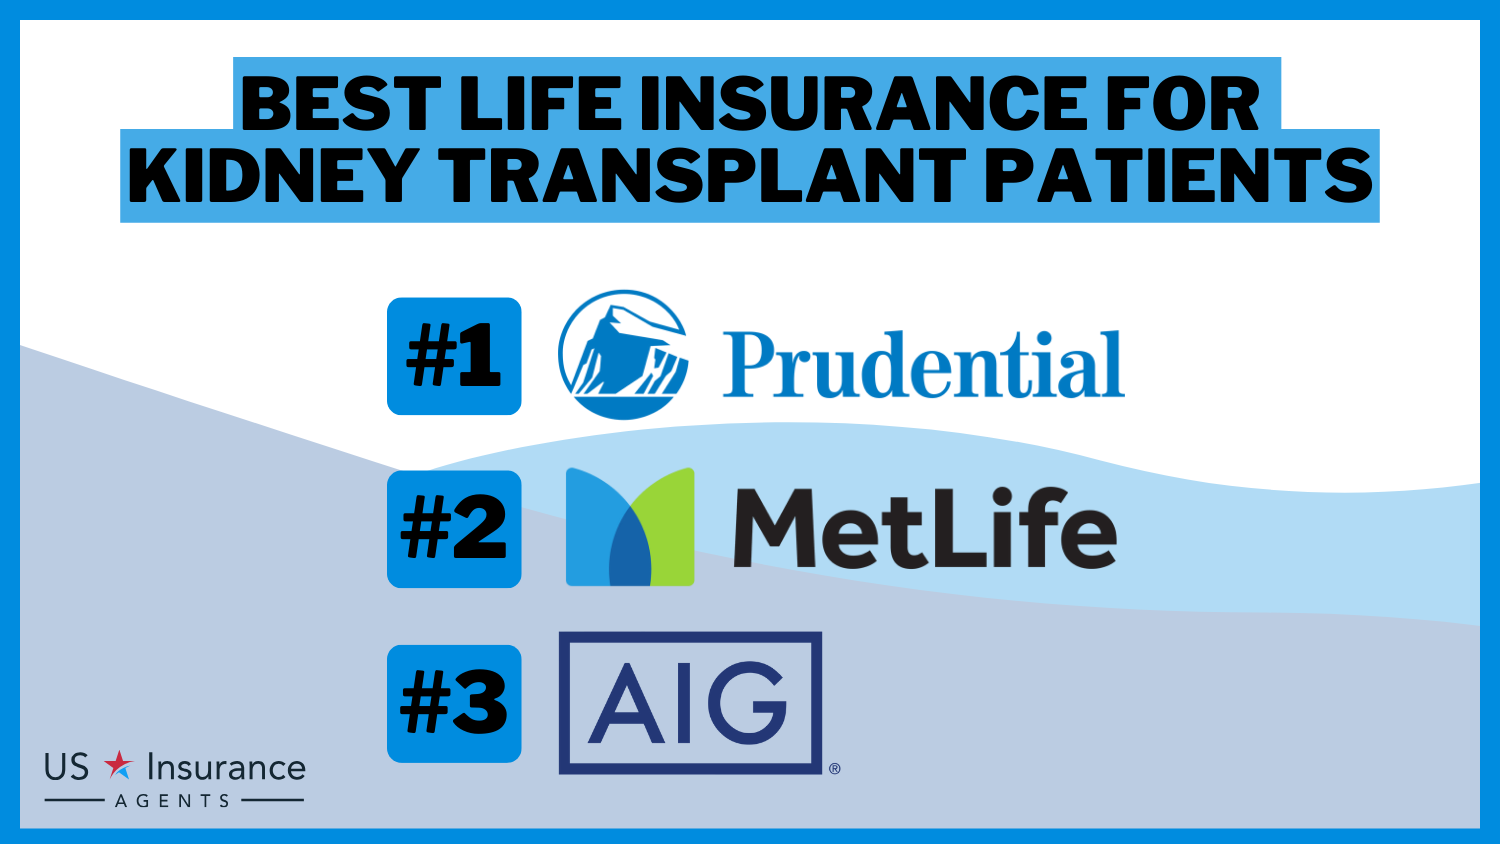 3 Best Life Insurance For Kidney Transplant Patients: Prudential, MetLife, and AIG